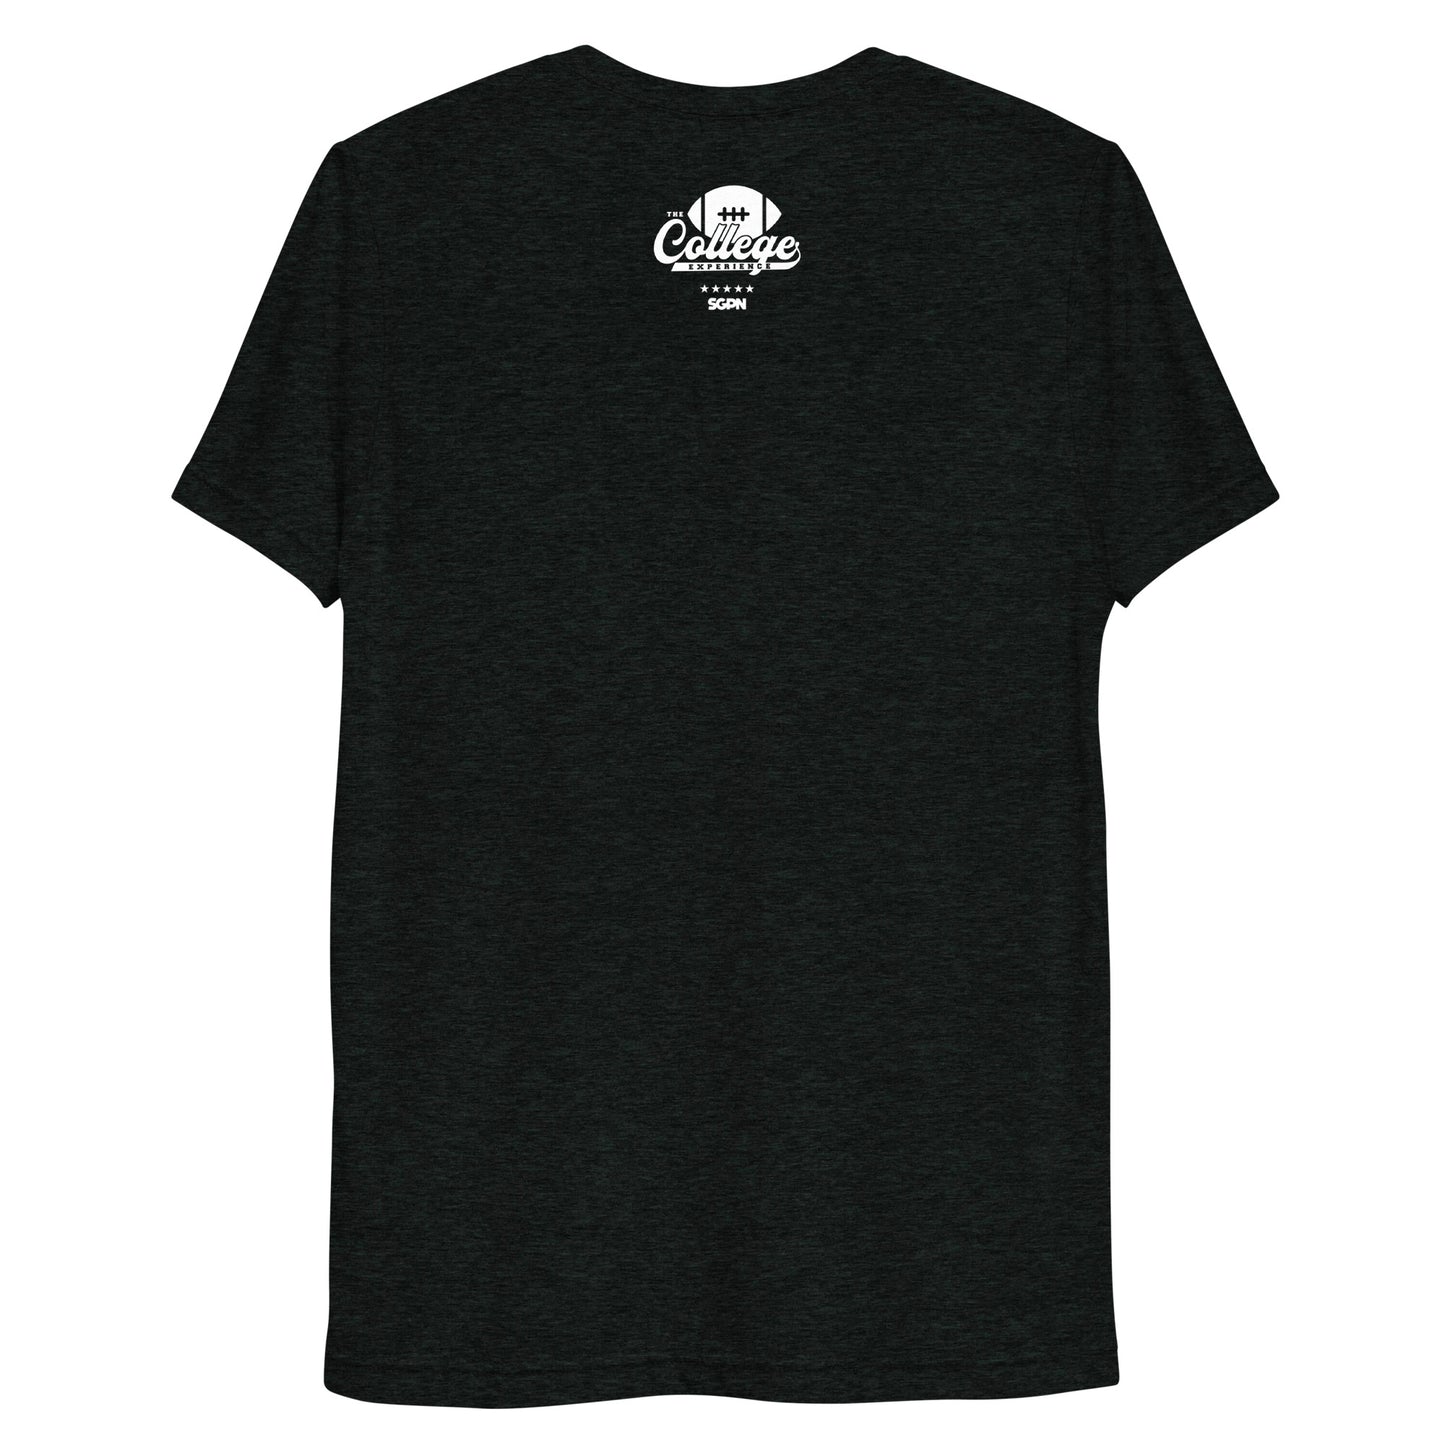 Kelly 0-1 - Short sleeve t-shirt - The College Football Experience